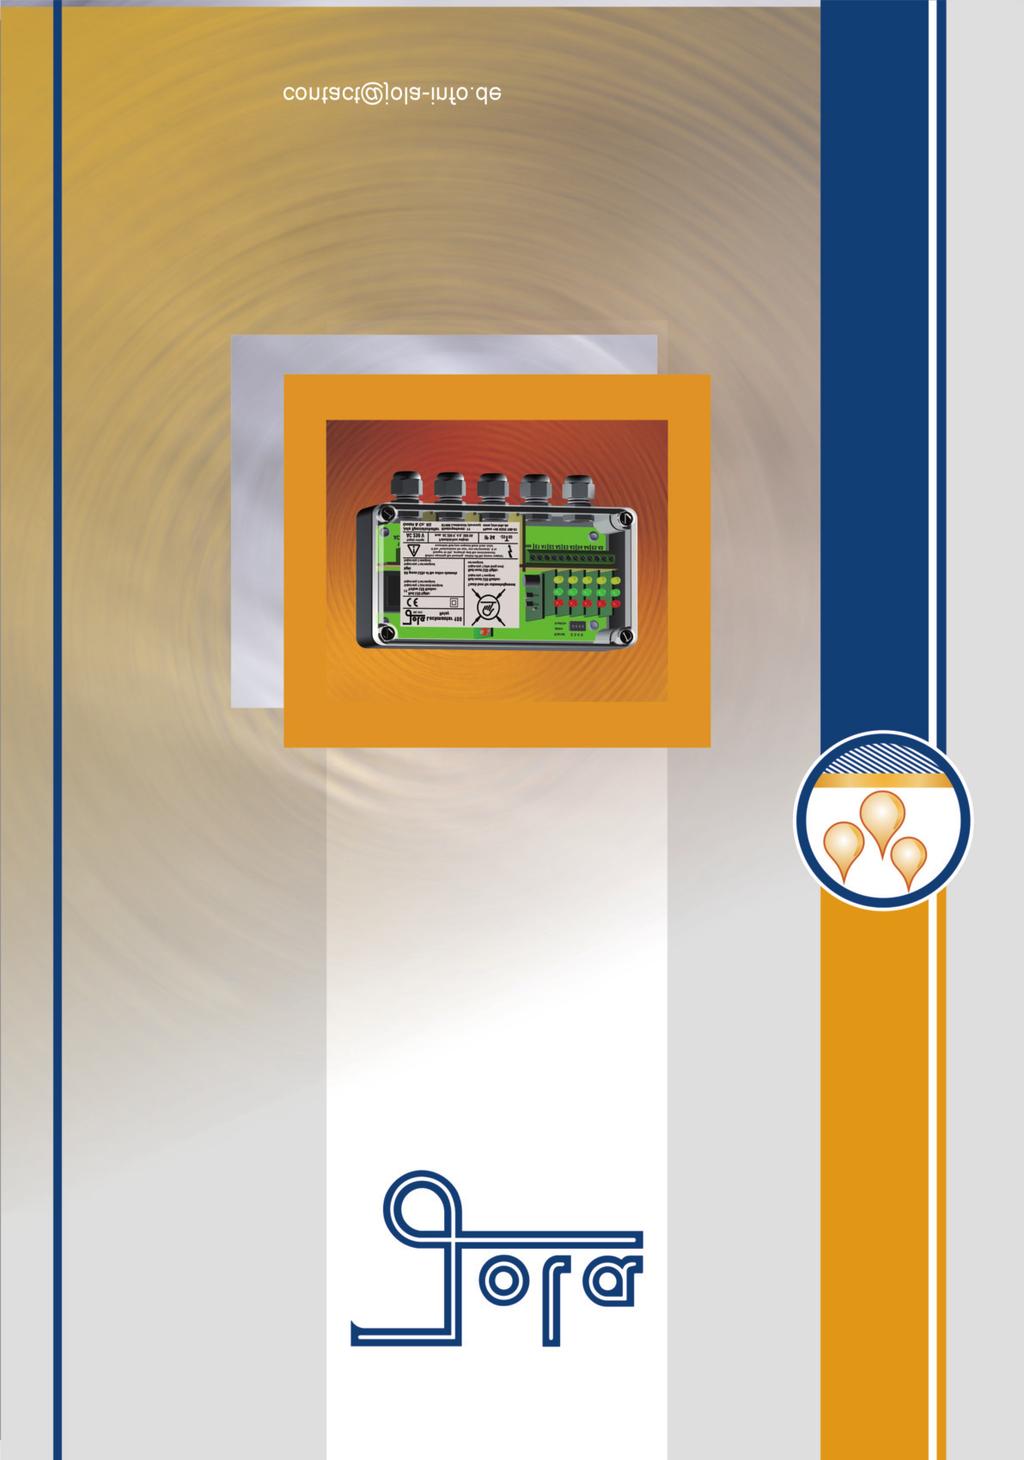 Leckmaster 155 relay for leakage detection for the connection of 5 capacitive sensors Jola Spezialschalter GmbH & Co.